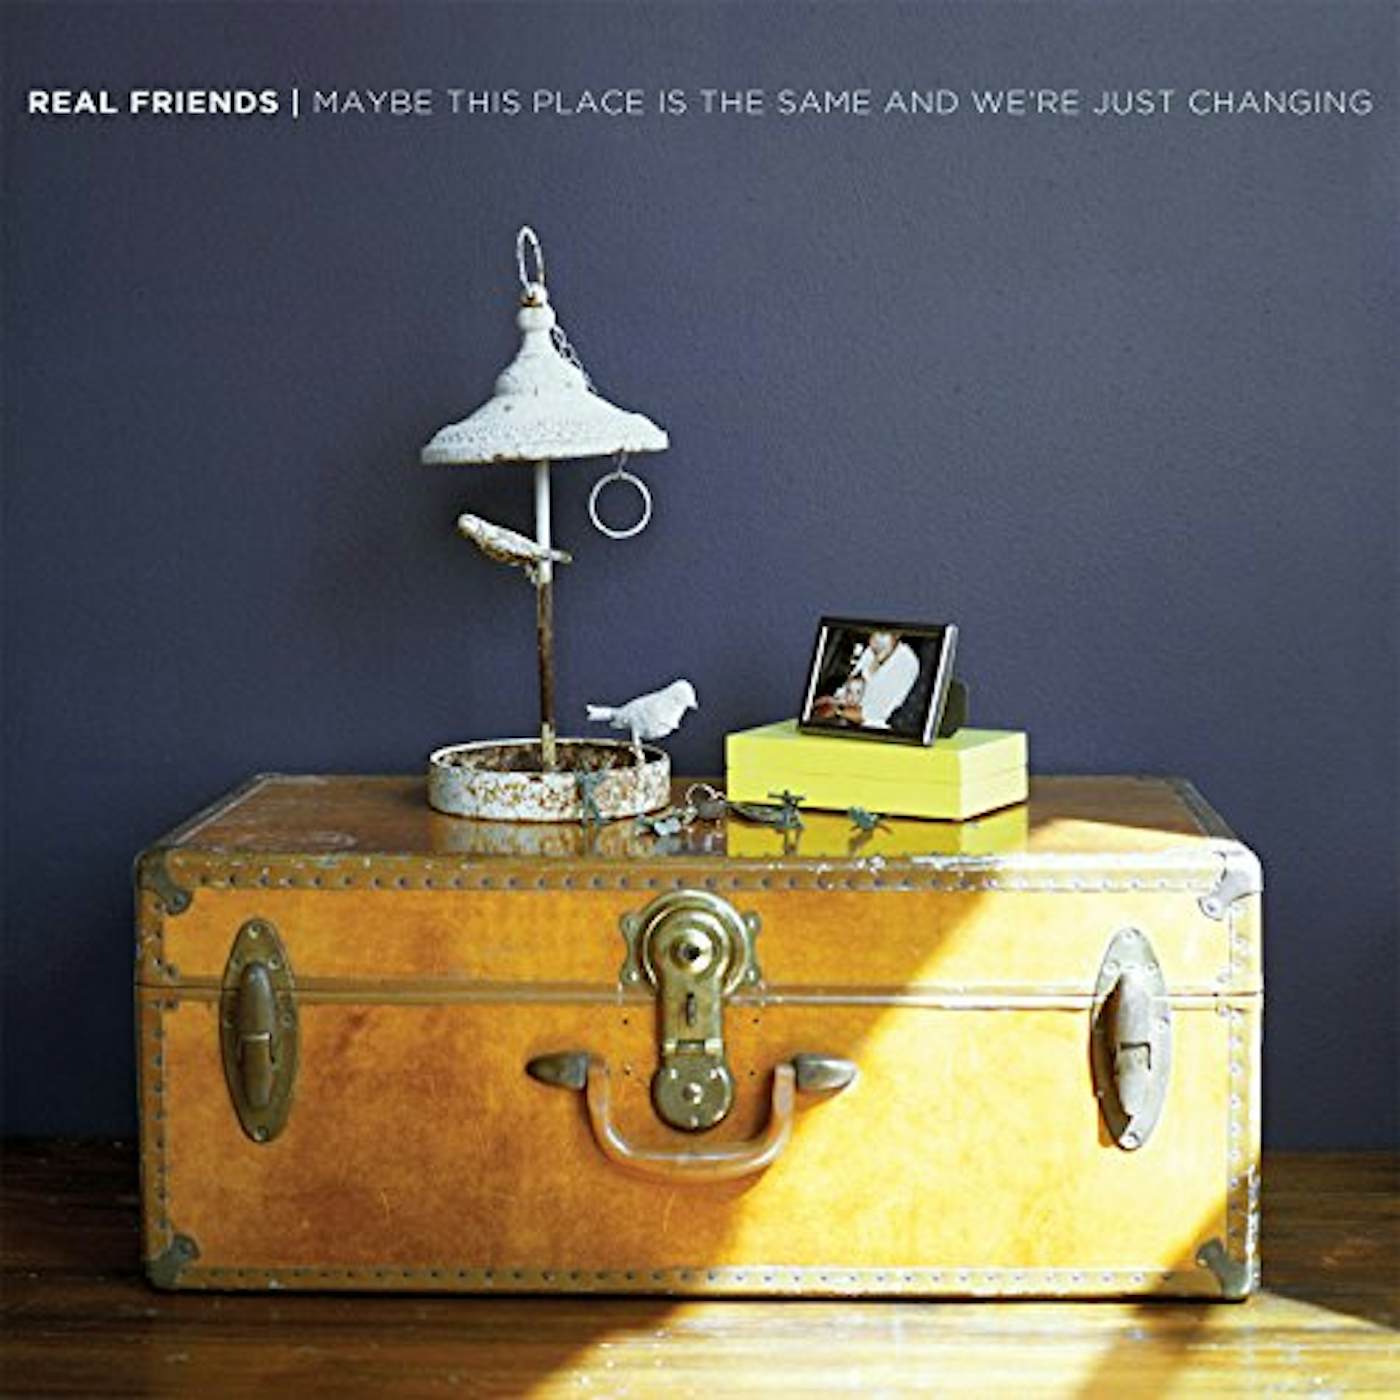 Real Friends MAYBE THIS PLACE IS THE SAME & WE'RE JUST CHANGING CD